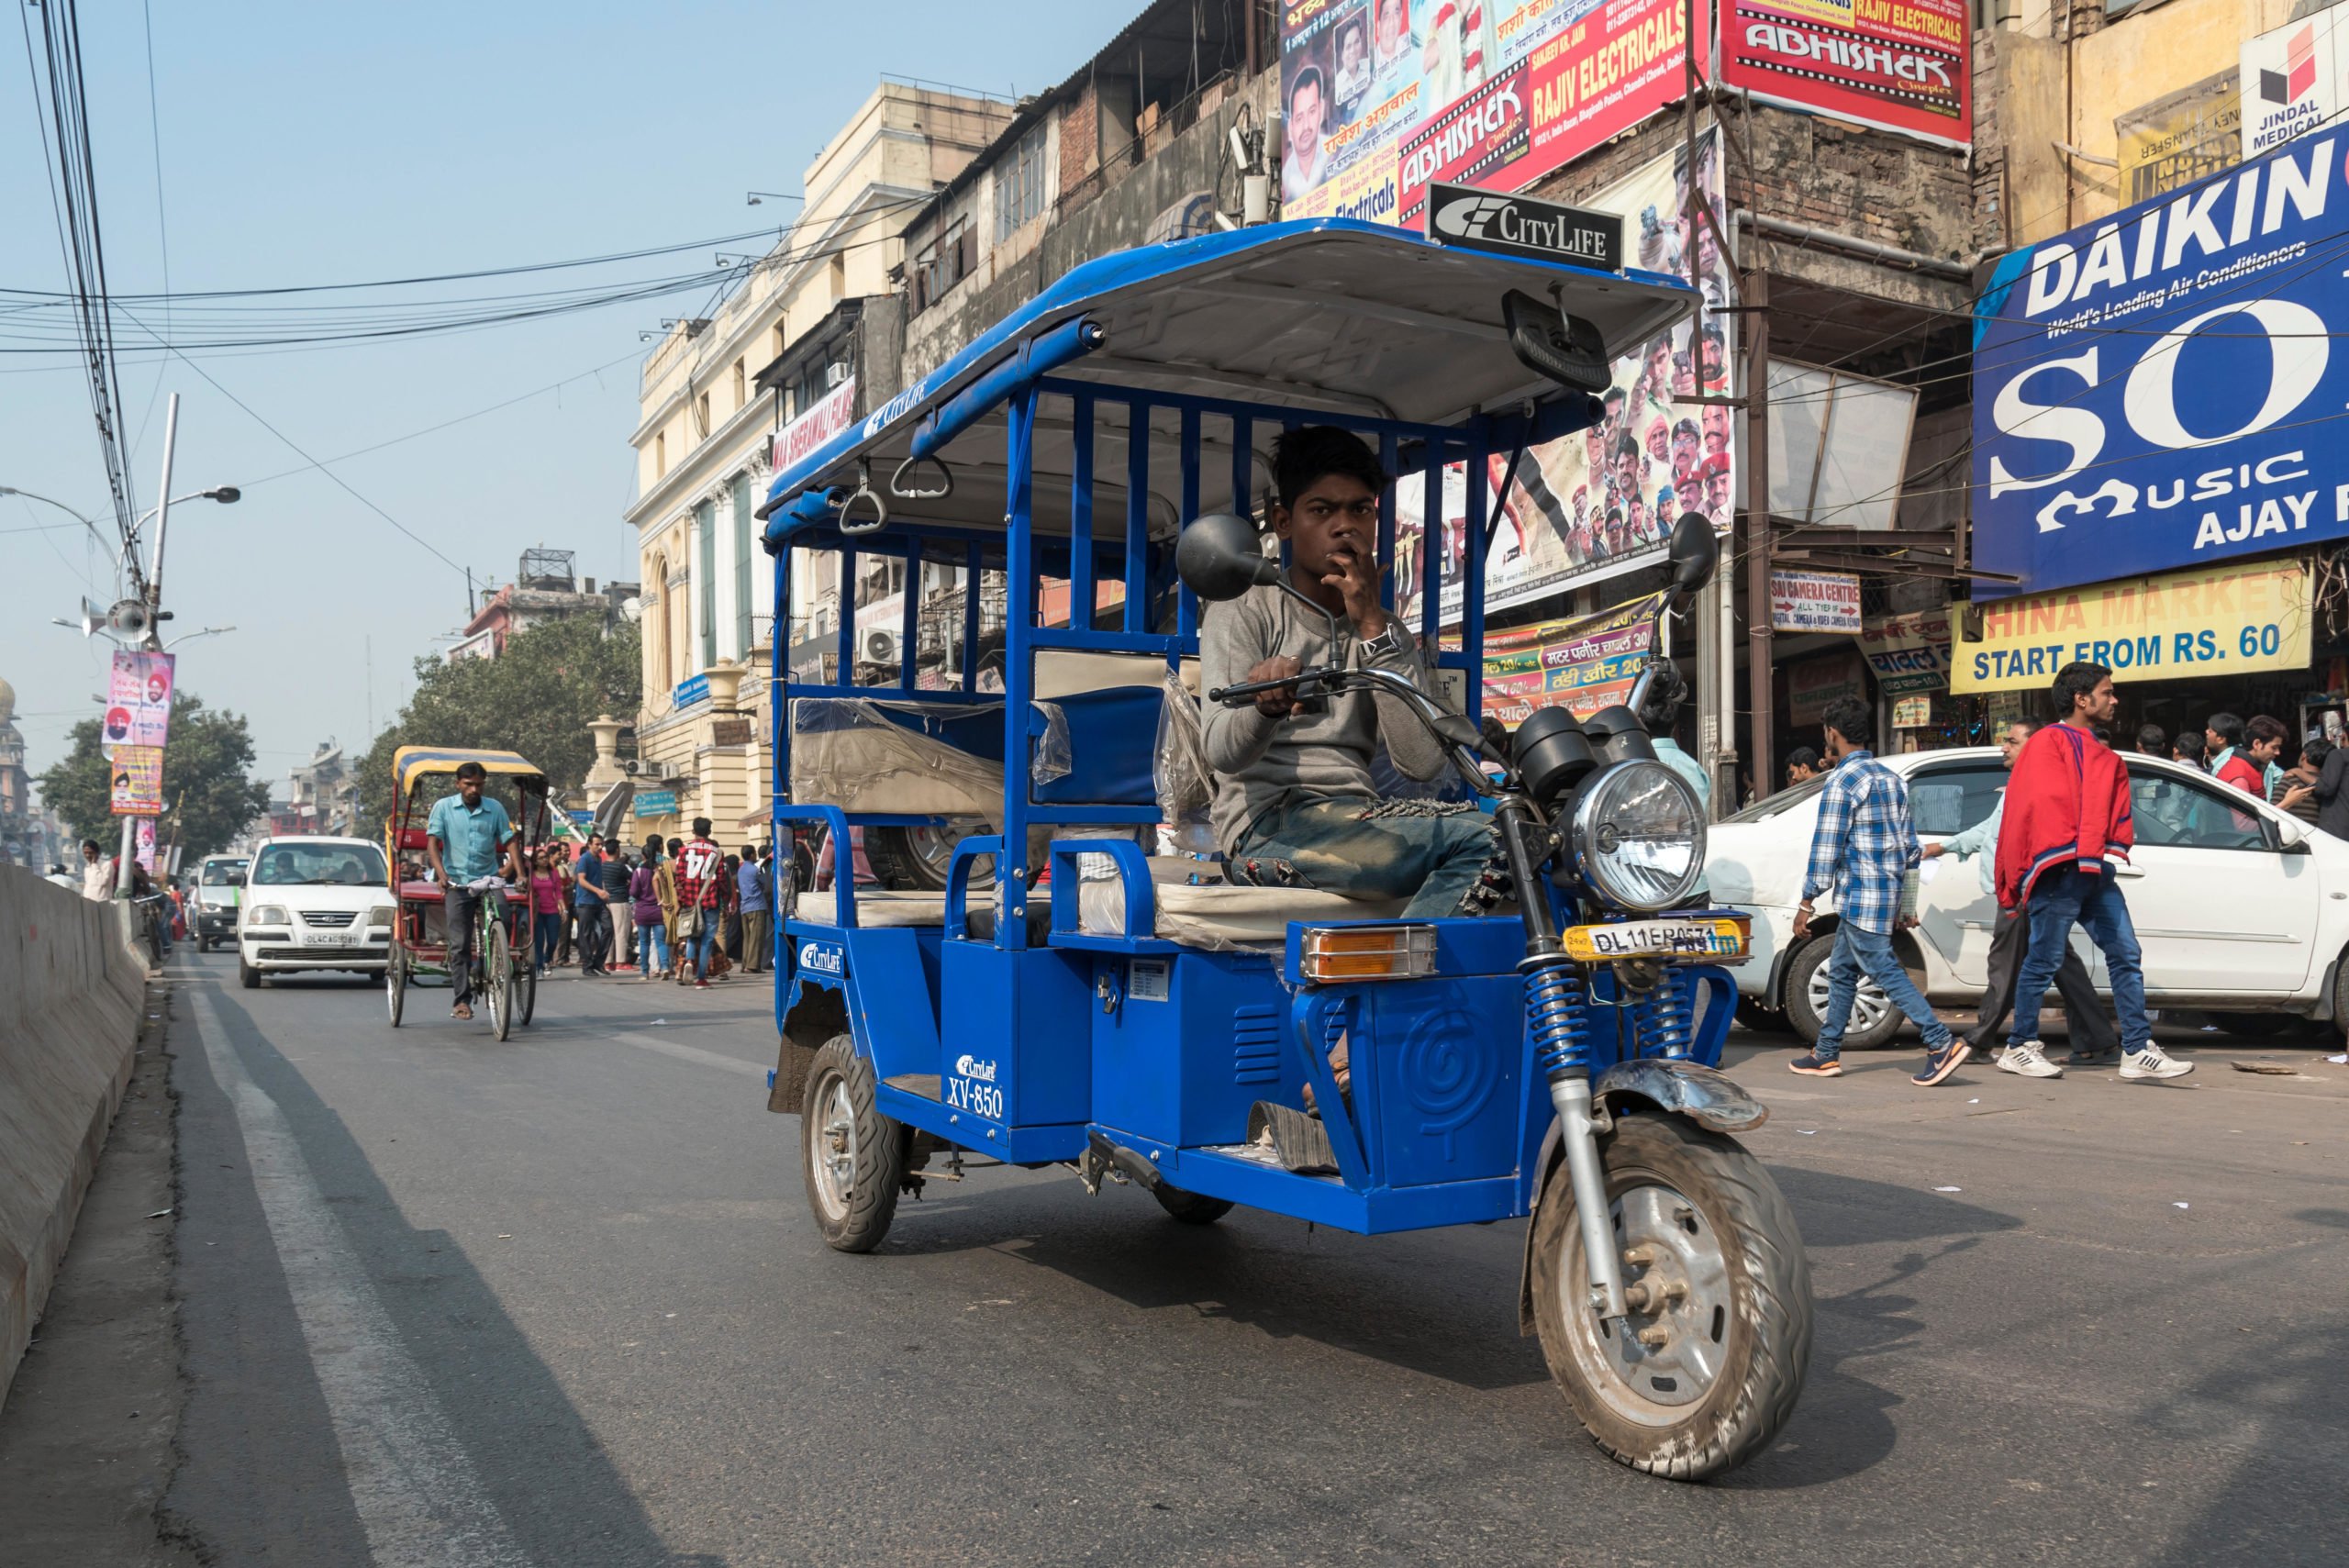 <p>Electric two-wheelers running on lead acid batteries have proliferated across Indian cities (Photo by Petr Svarc / Alamy)</p>